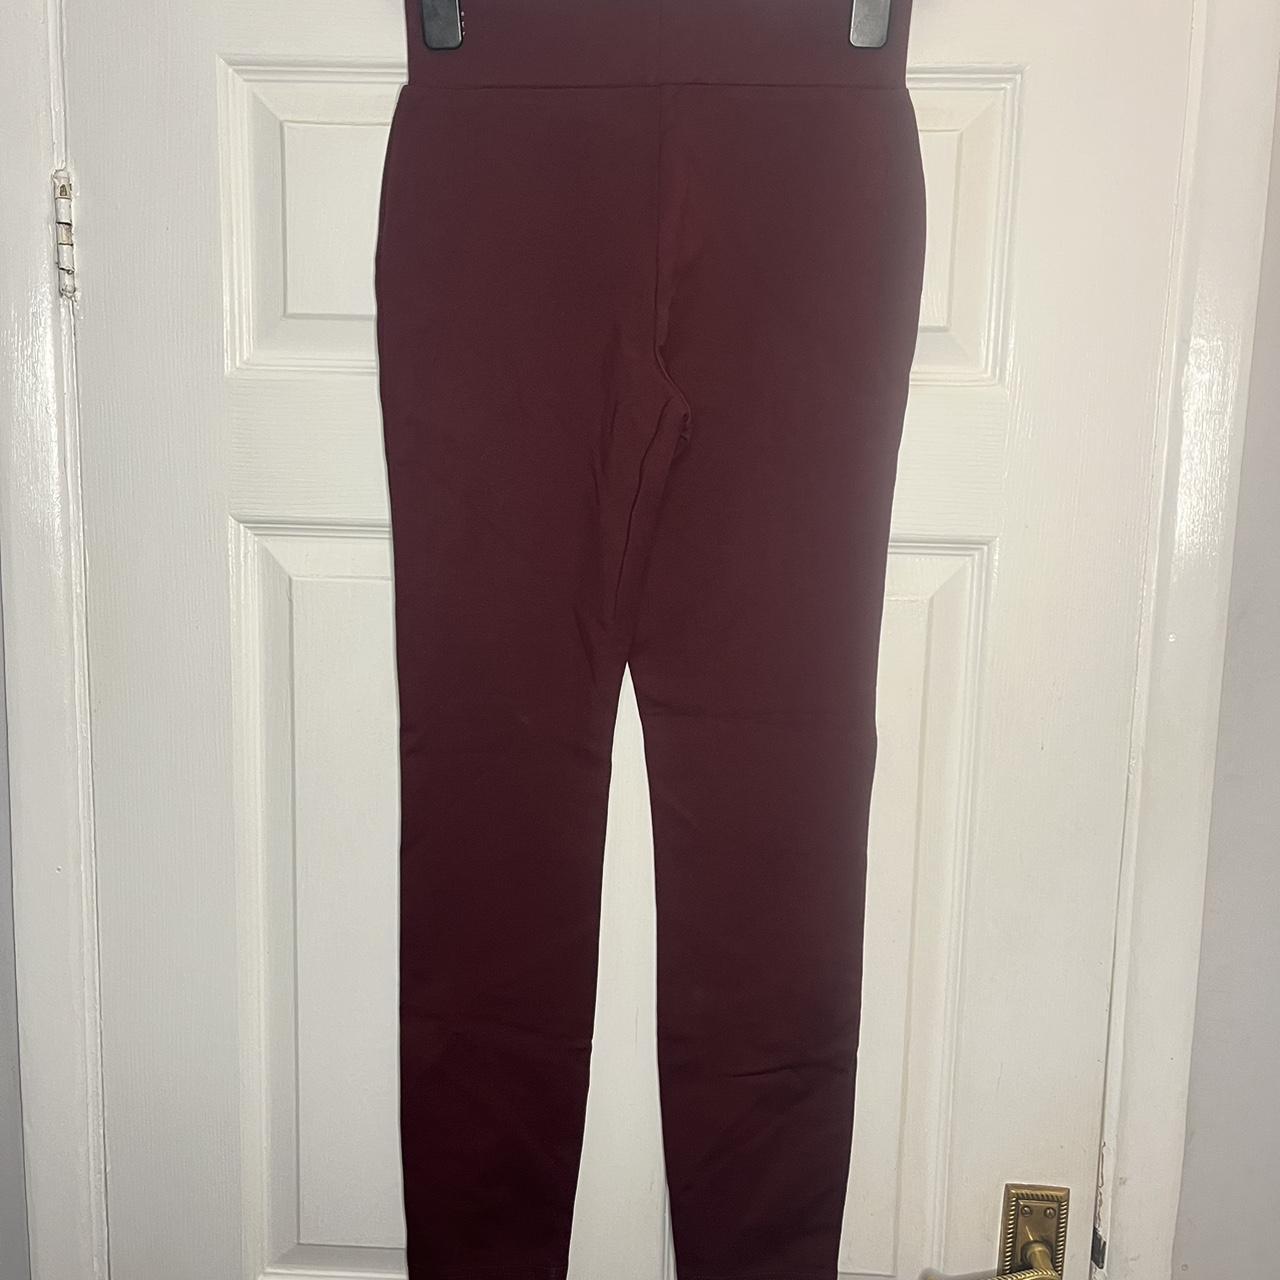 Buy Friends Like These Red Tailored Ankle Grazer Trousers from Next India